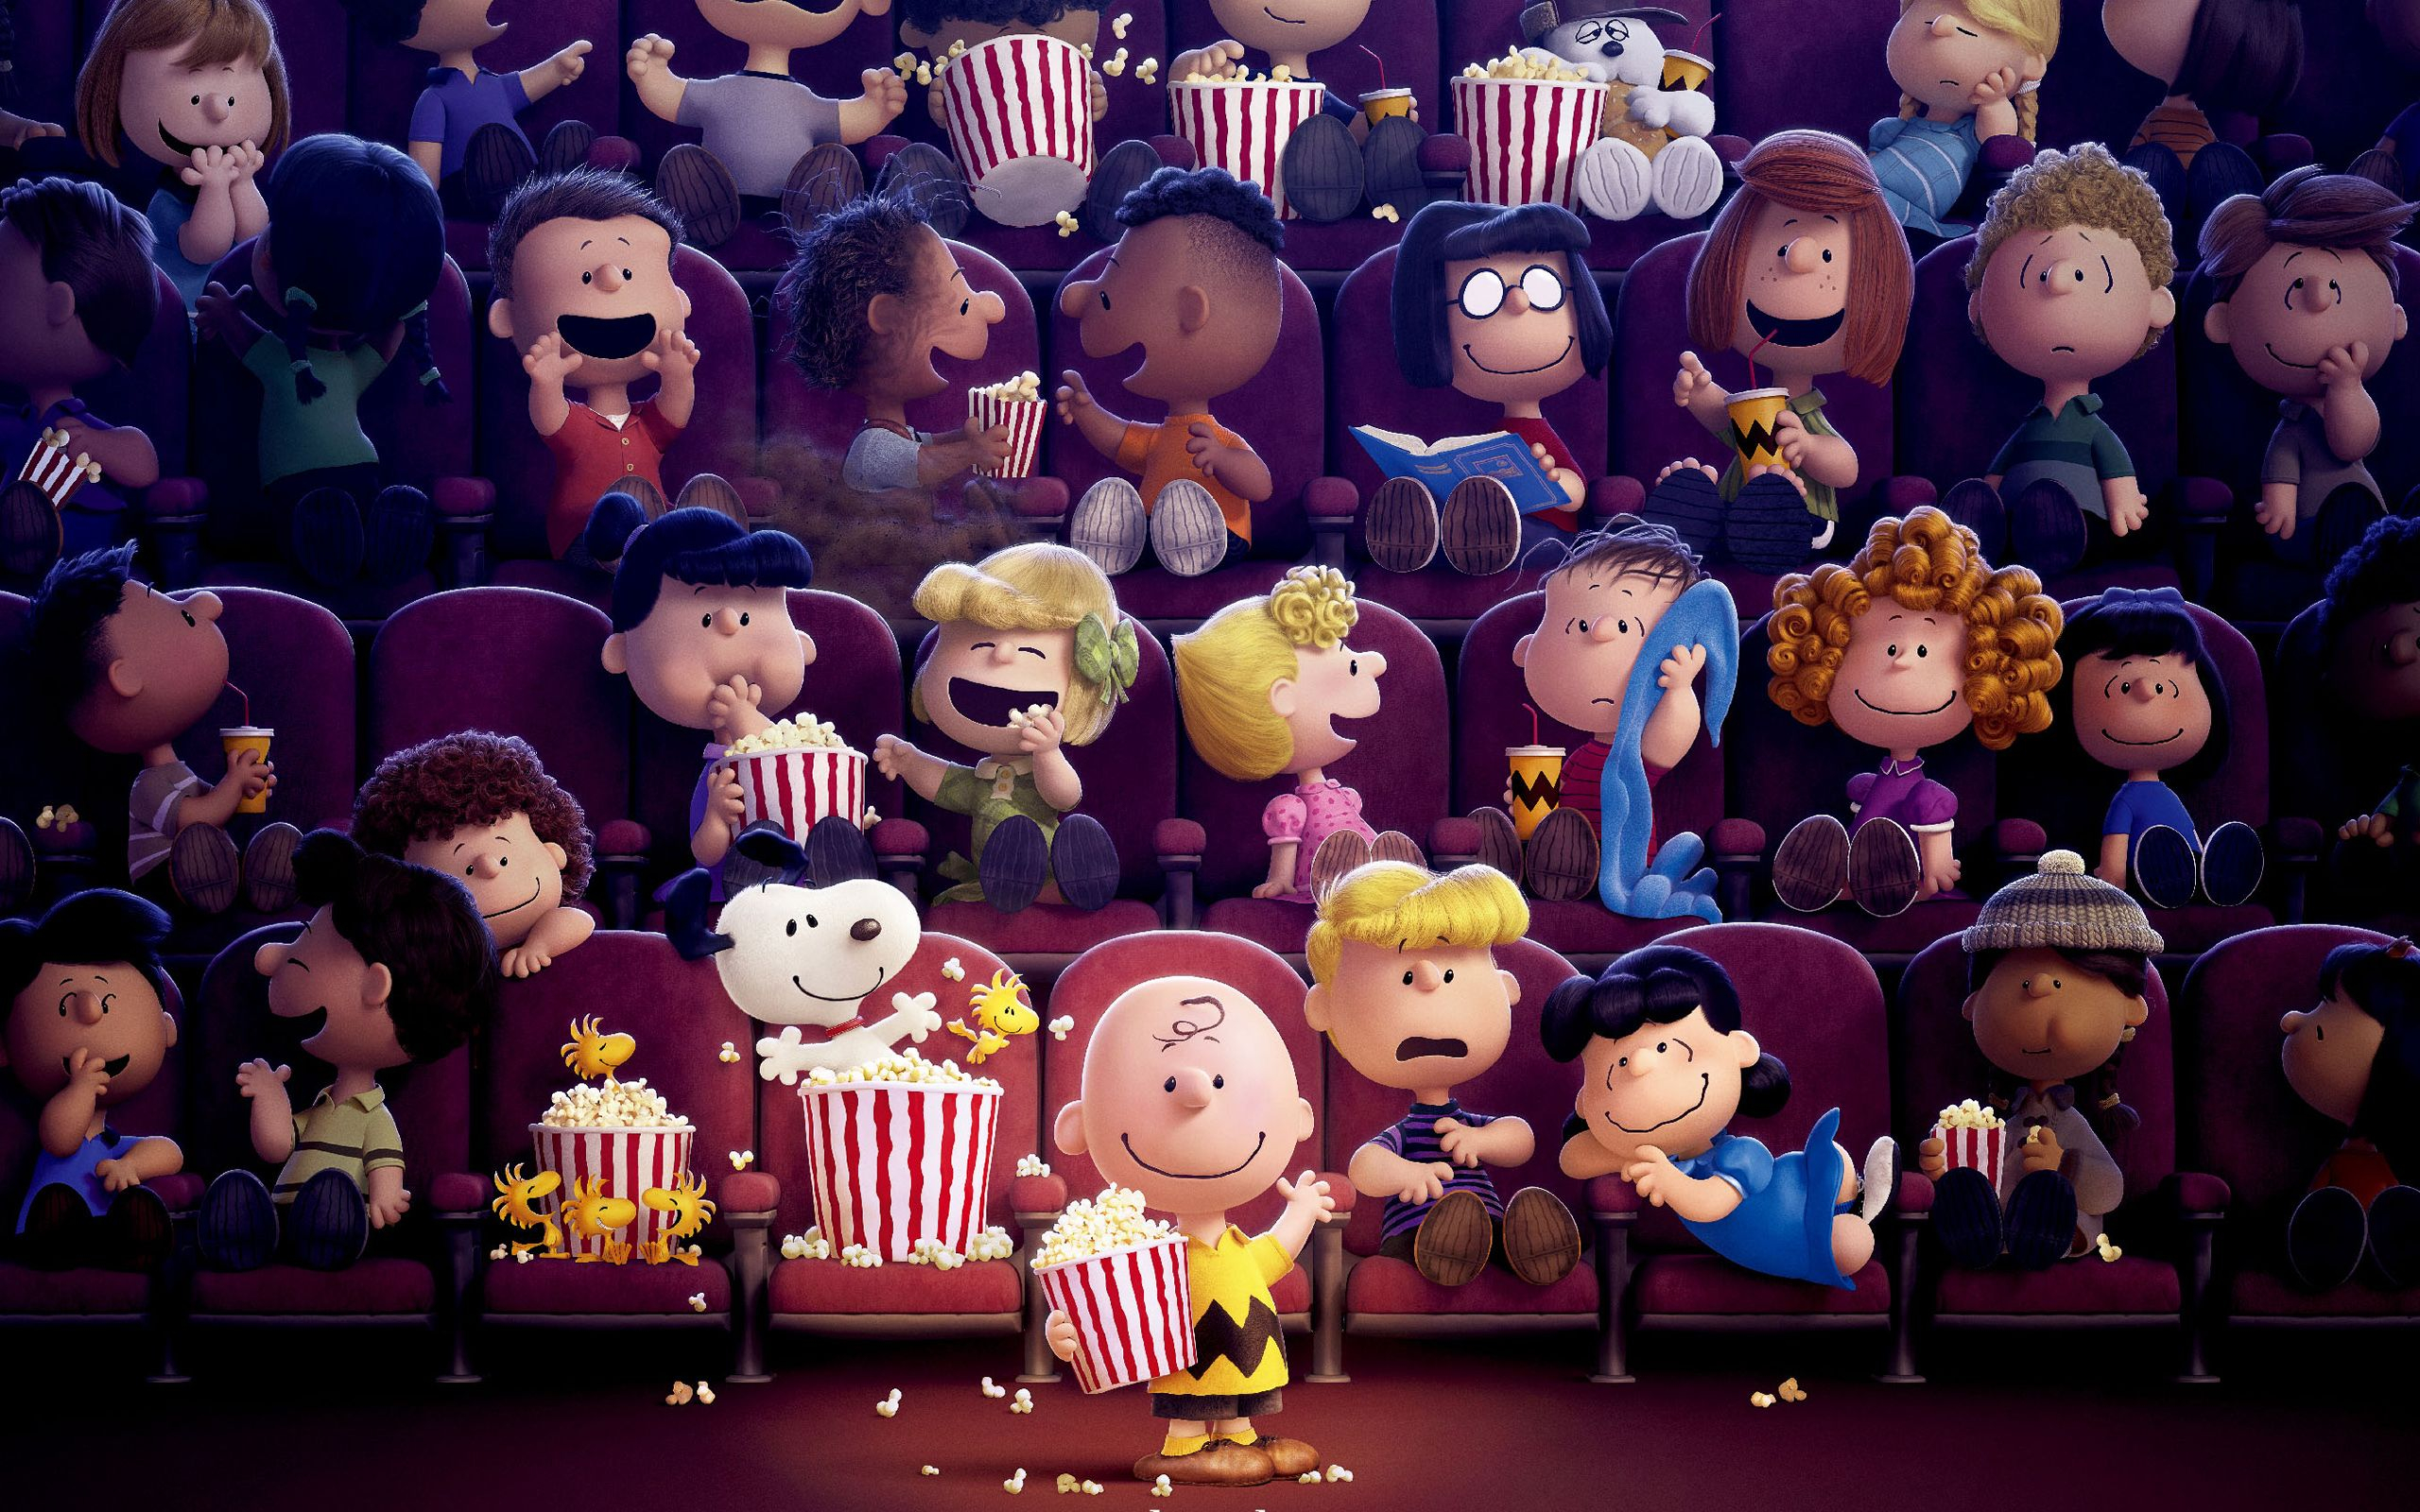 2560x1600 The Peanuts Movie Wallpapers | HD Wallpapers | Peanuts movie, Charlie brown wallpaper, Movie wallpapers